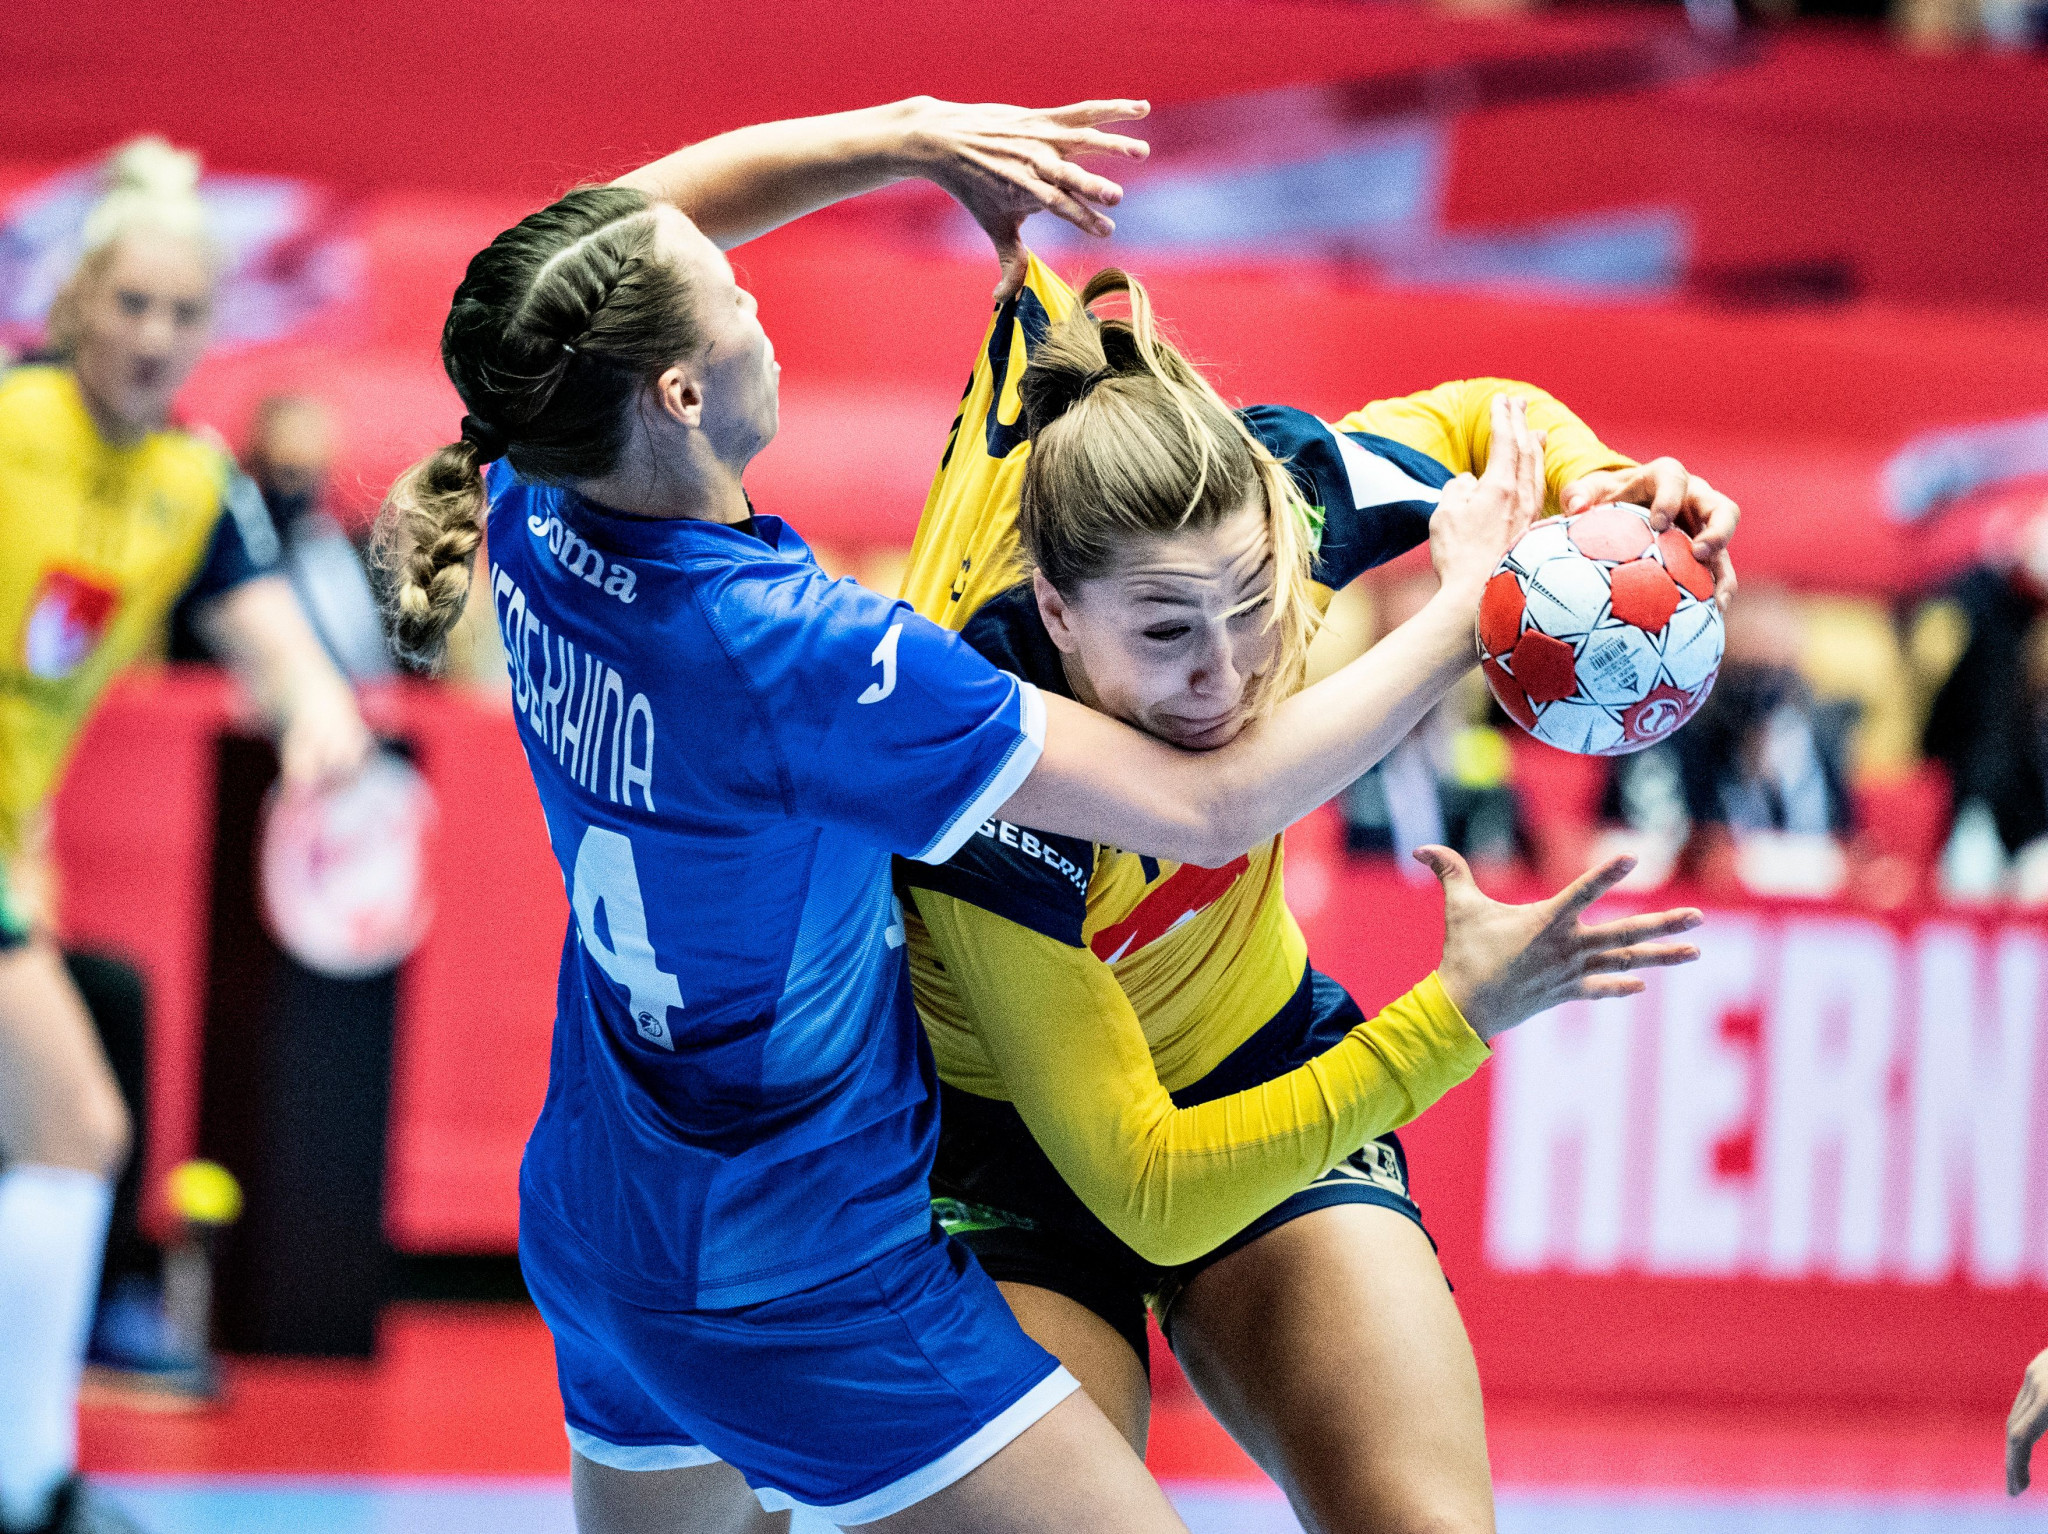 Czech Republic eliminated from European Women's Handball Championship after late loss to Spain